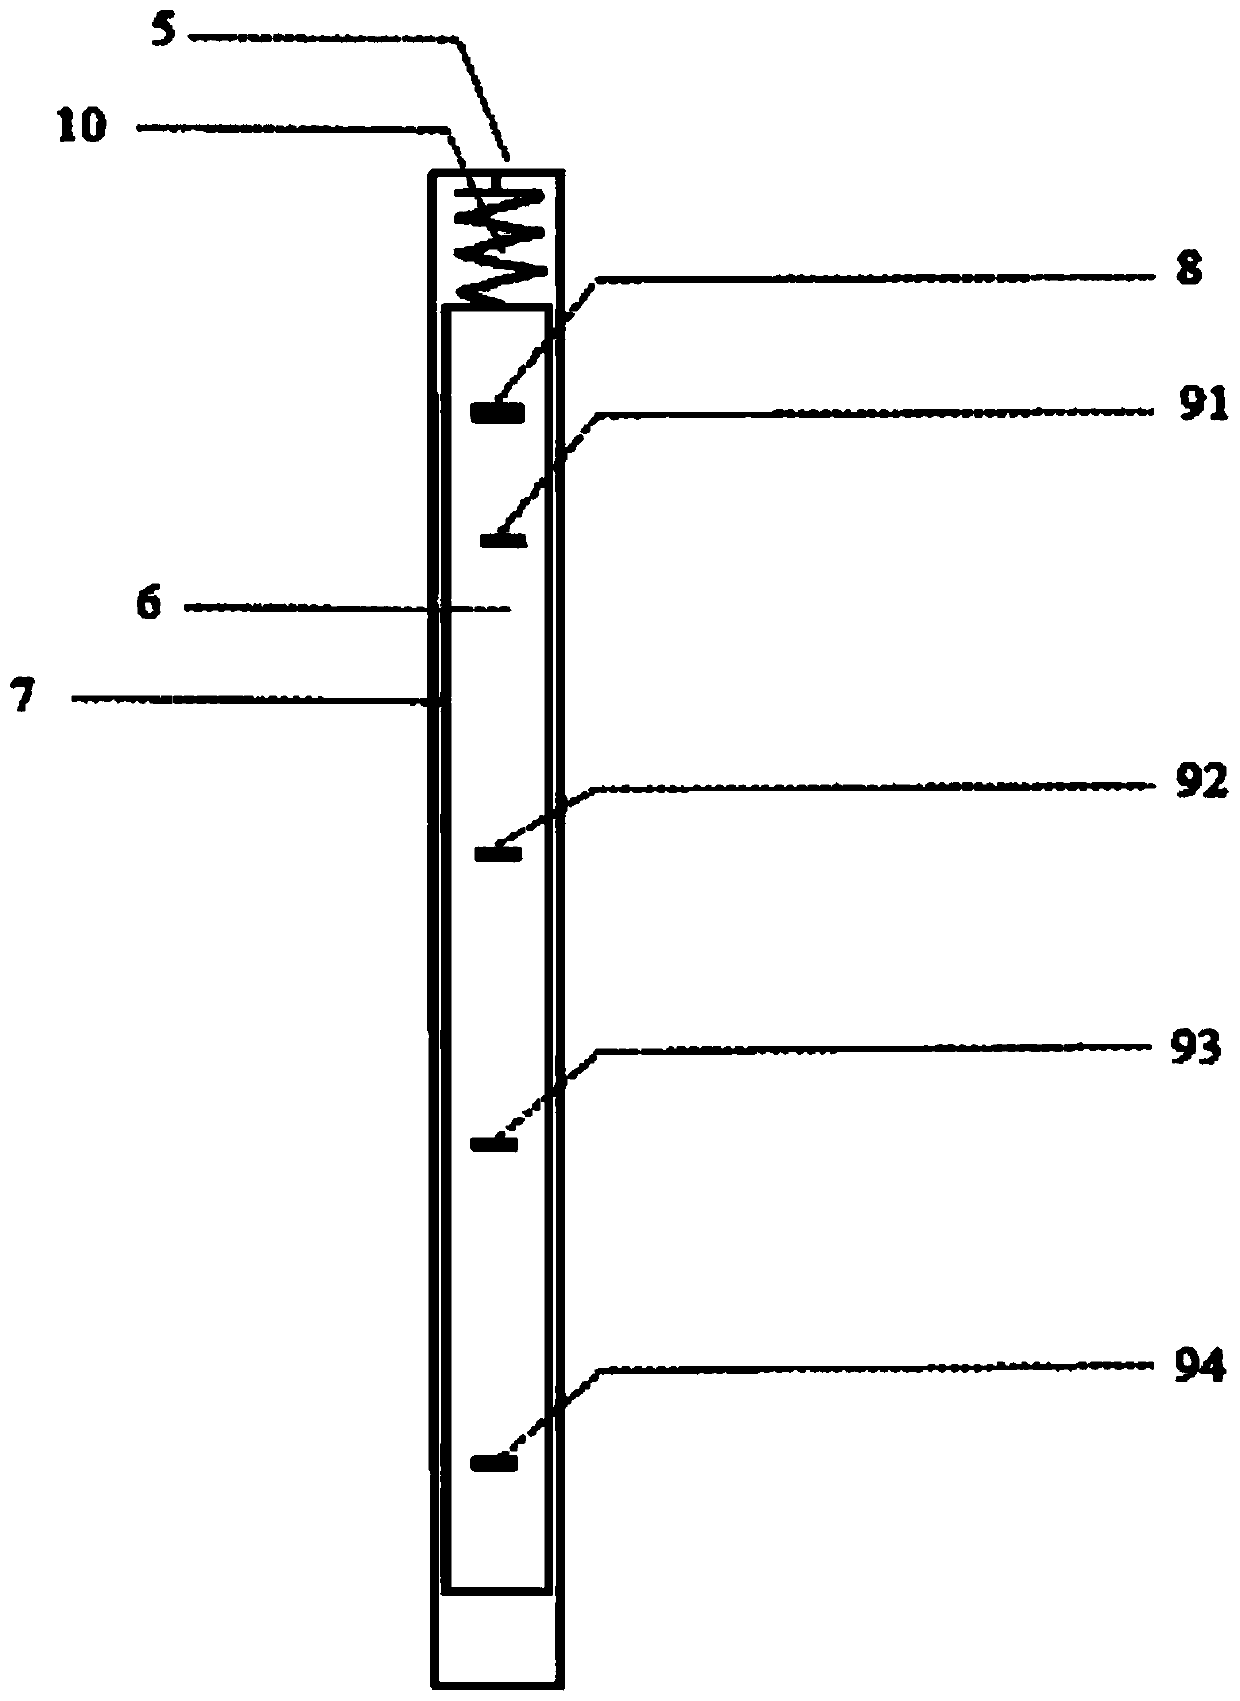 A mechanical logic device and method of use